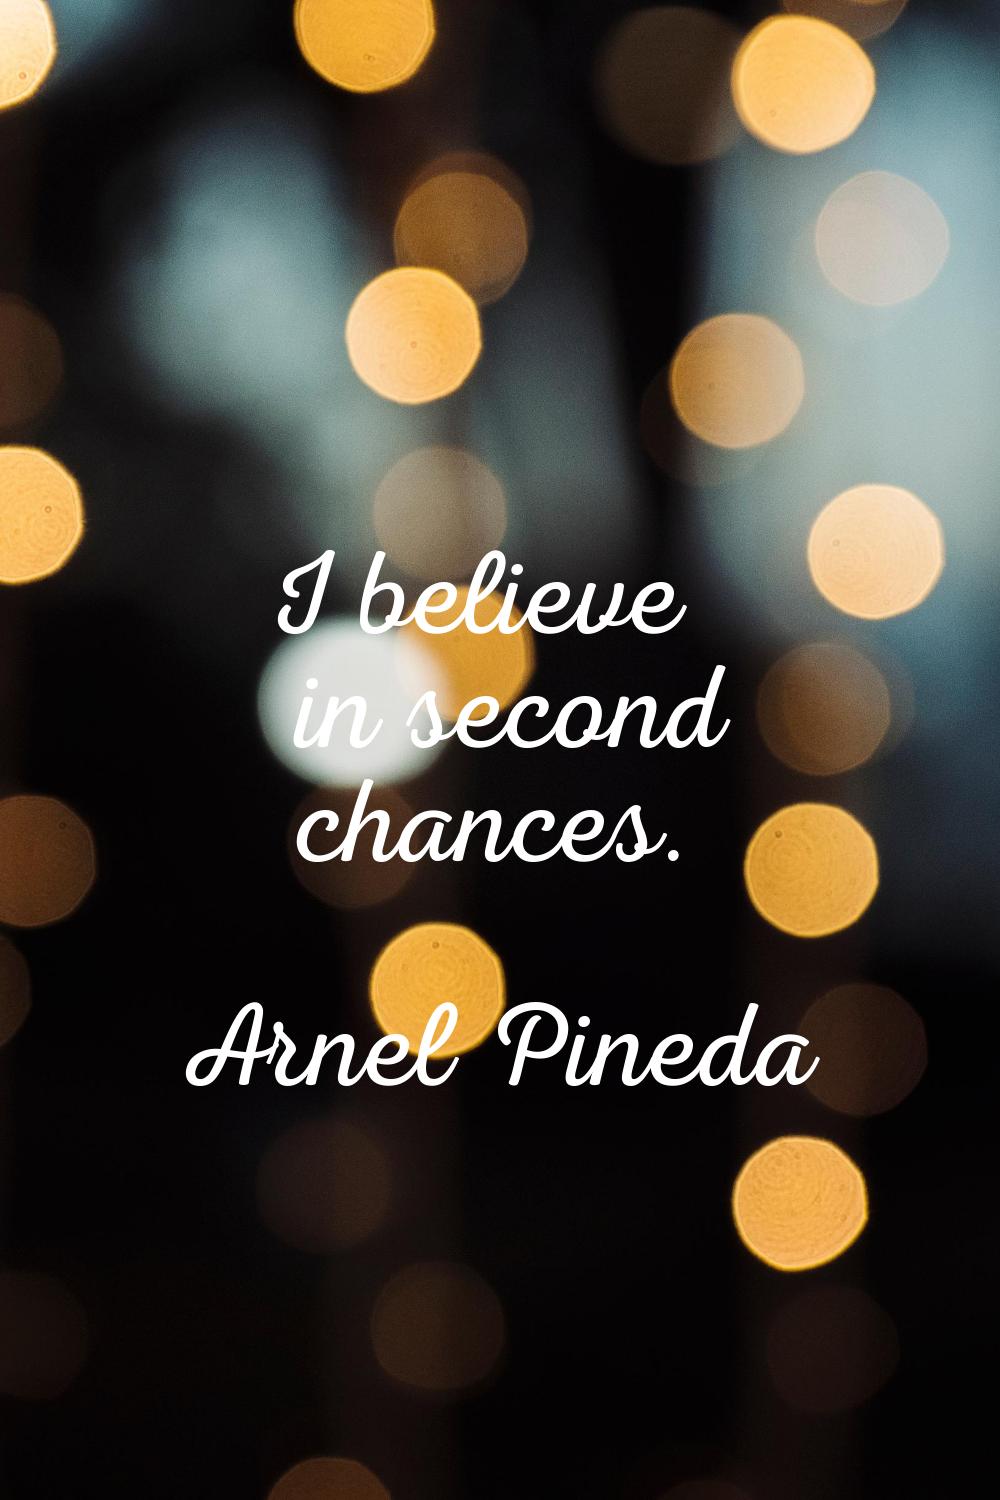 I believe in second chances.